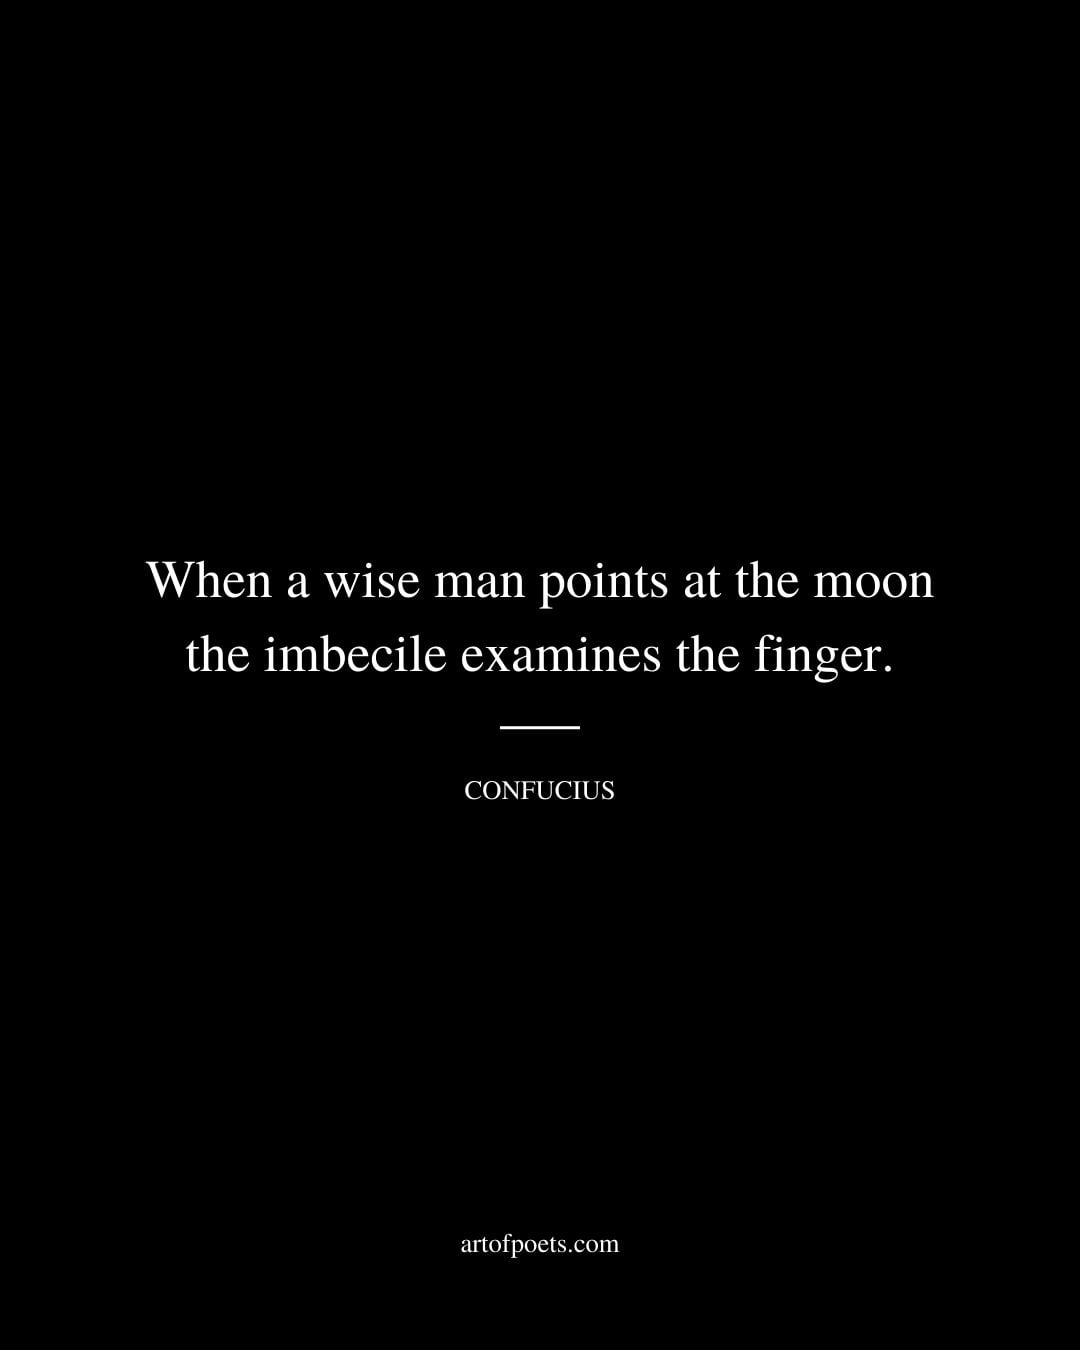 When a wise man points at the moon the imbecile examines the finger